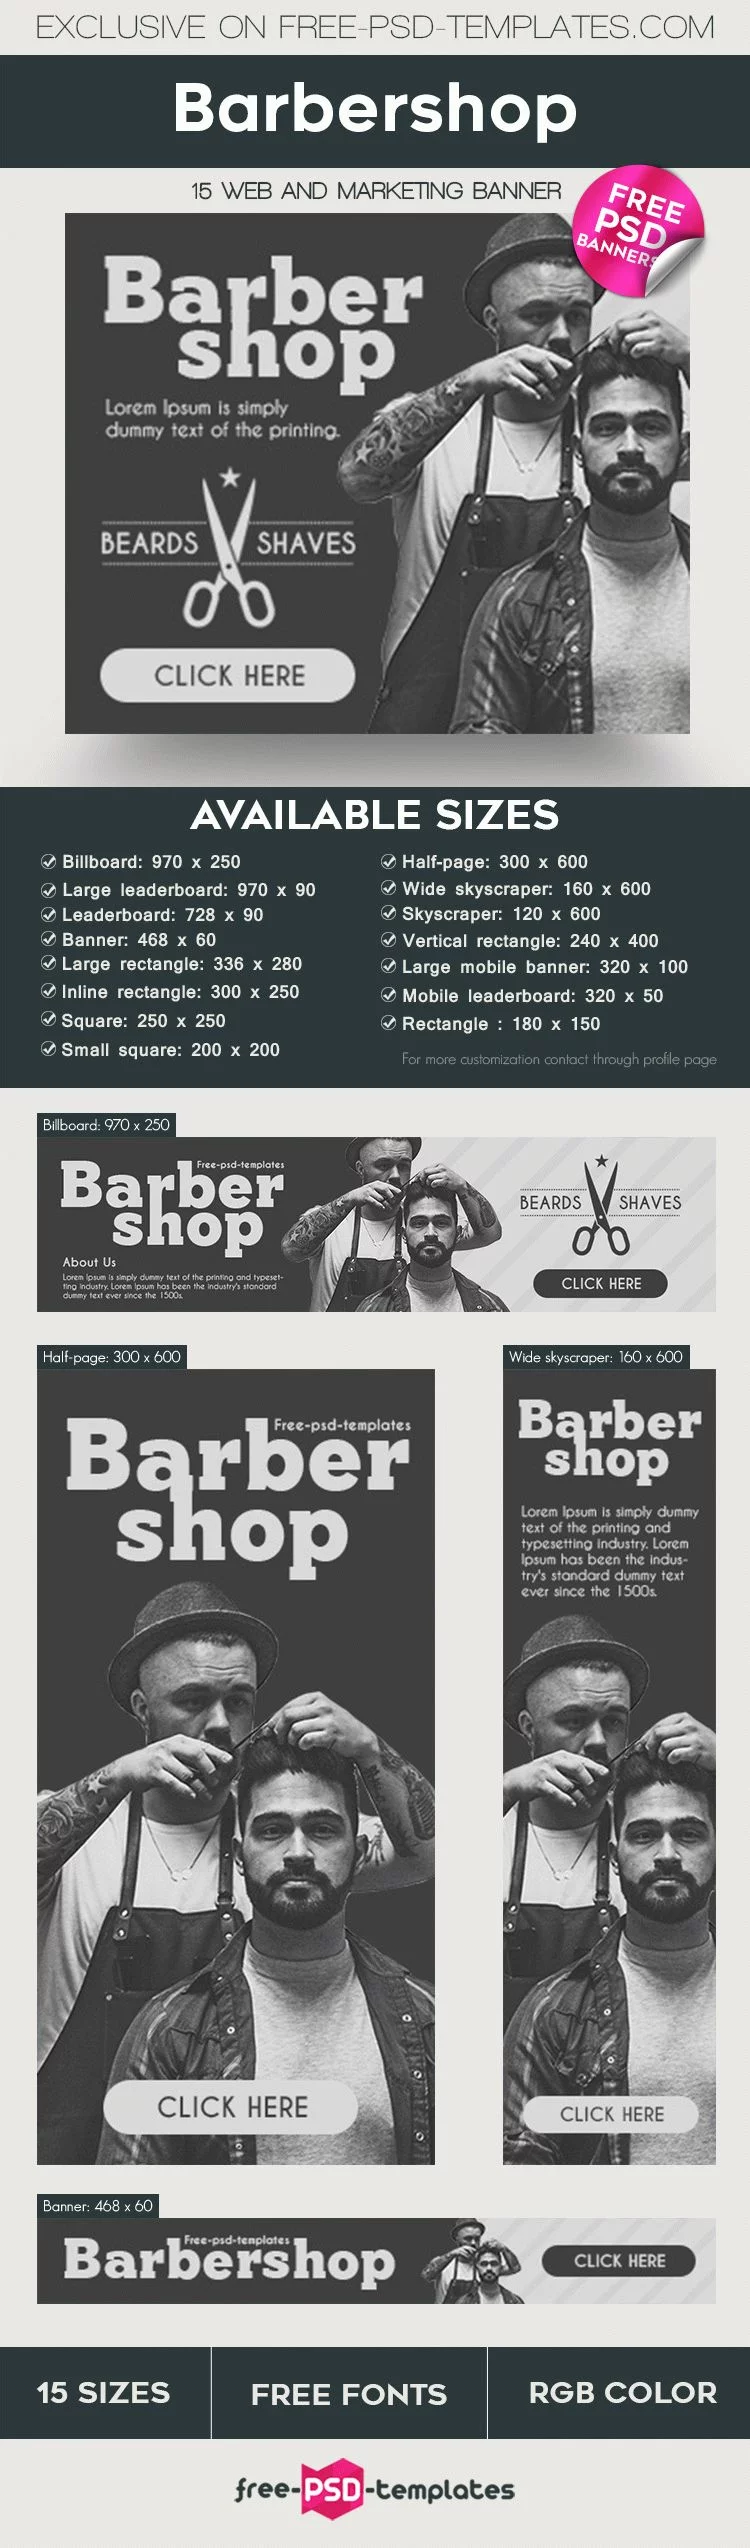 15 Free Barbershop Banners Collection in PSD